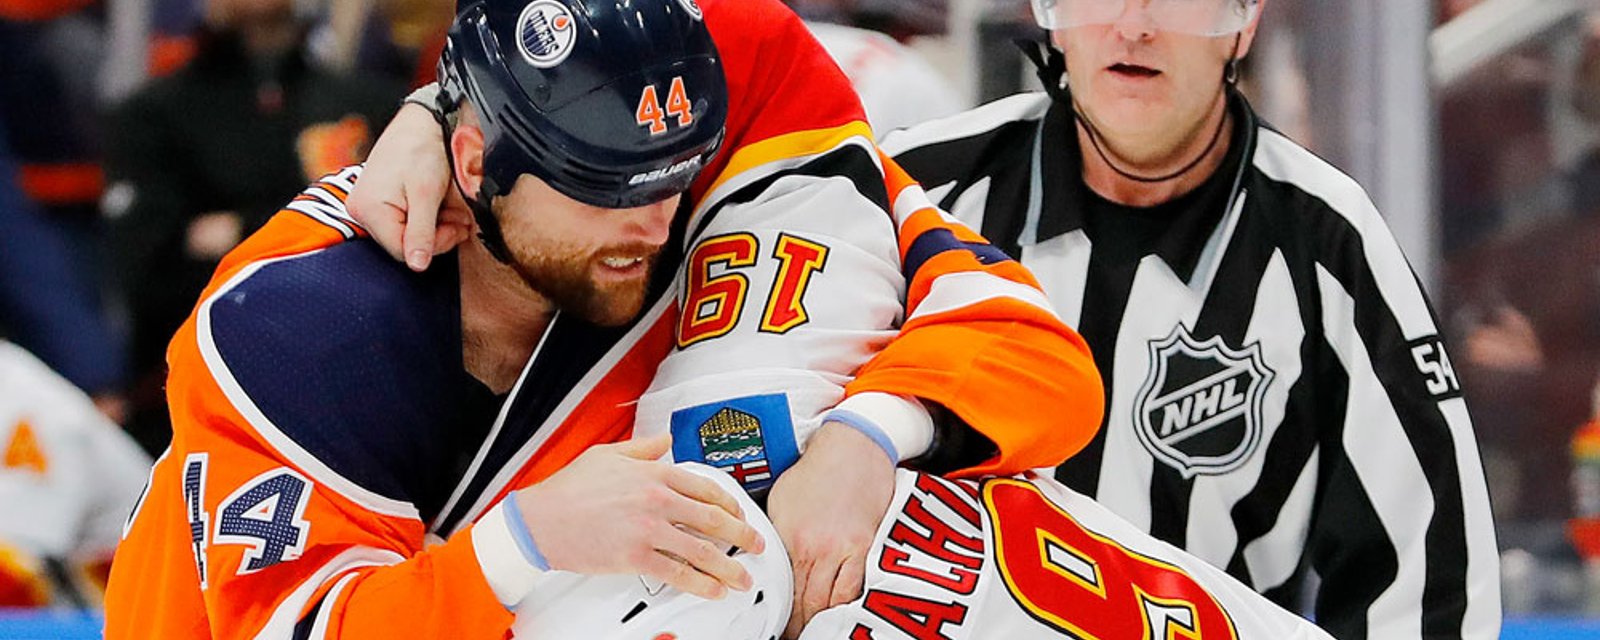 Kassian gives props to Tkachuk after manning up in spirited fight from last night